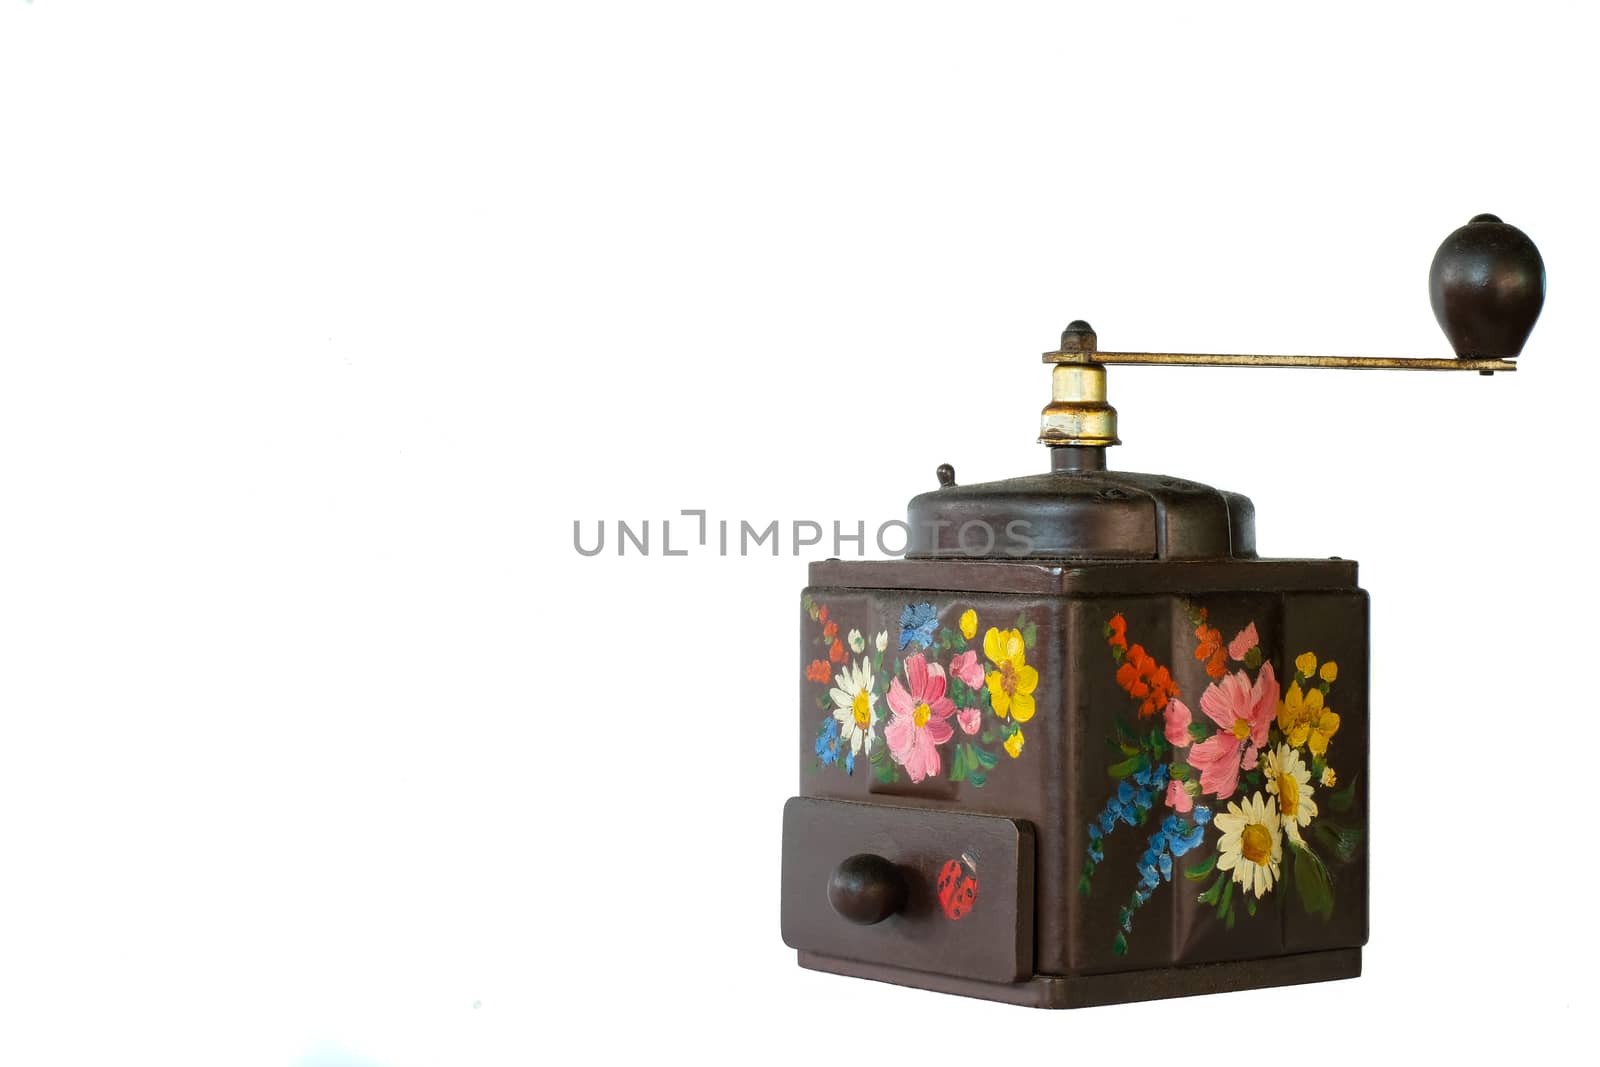 a vintage coffee grinder with floral pattern, isolated on white background